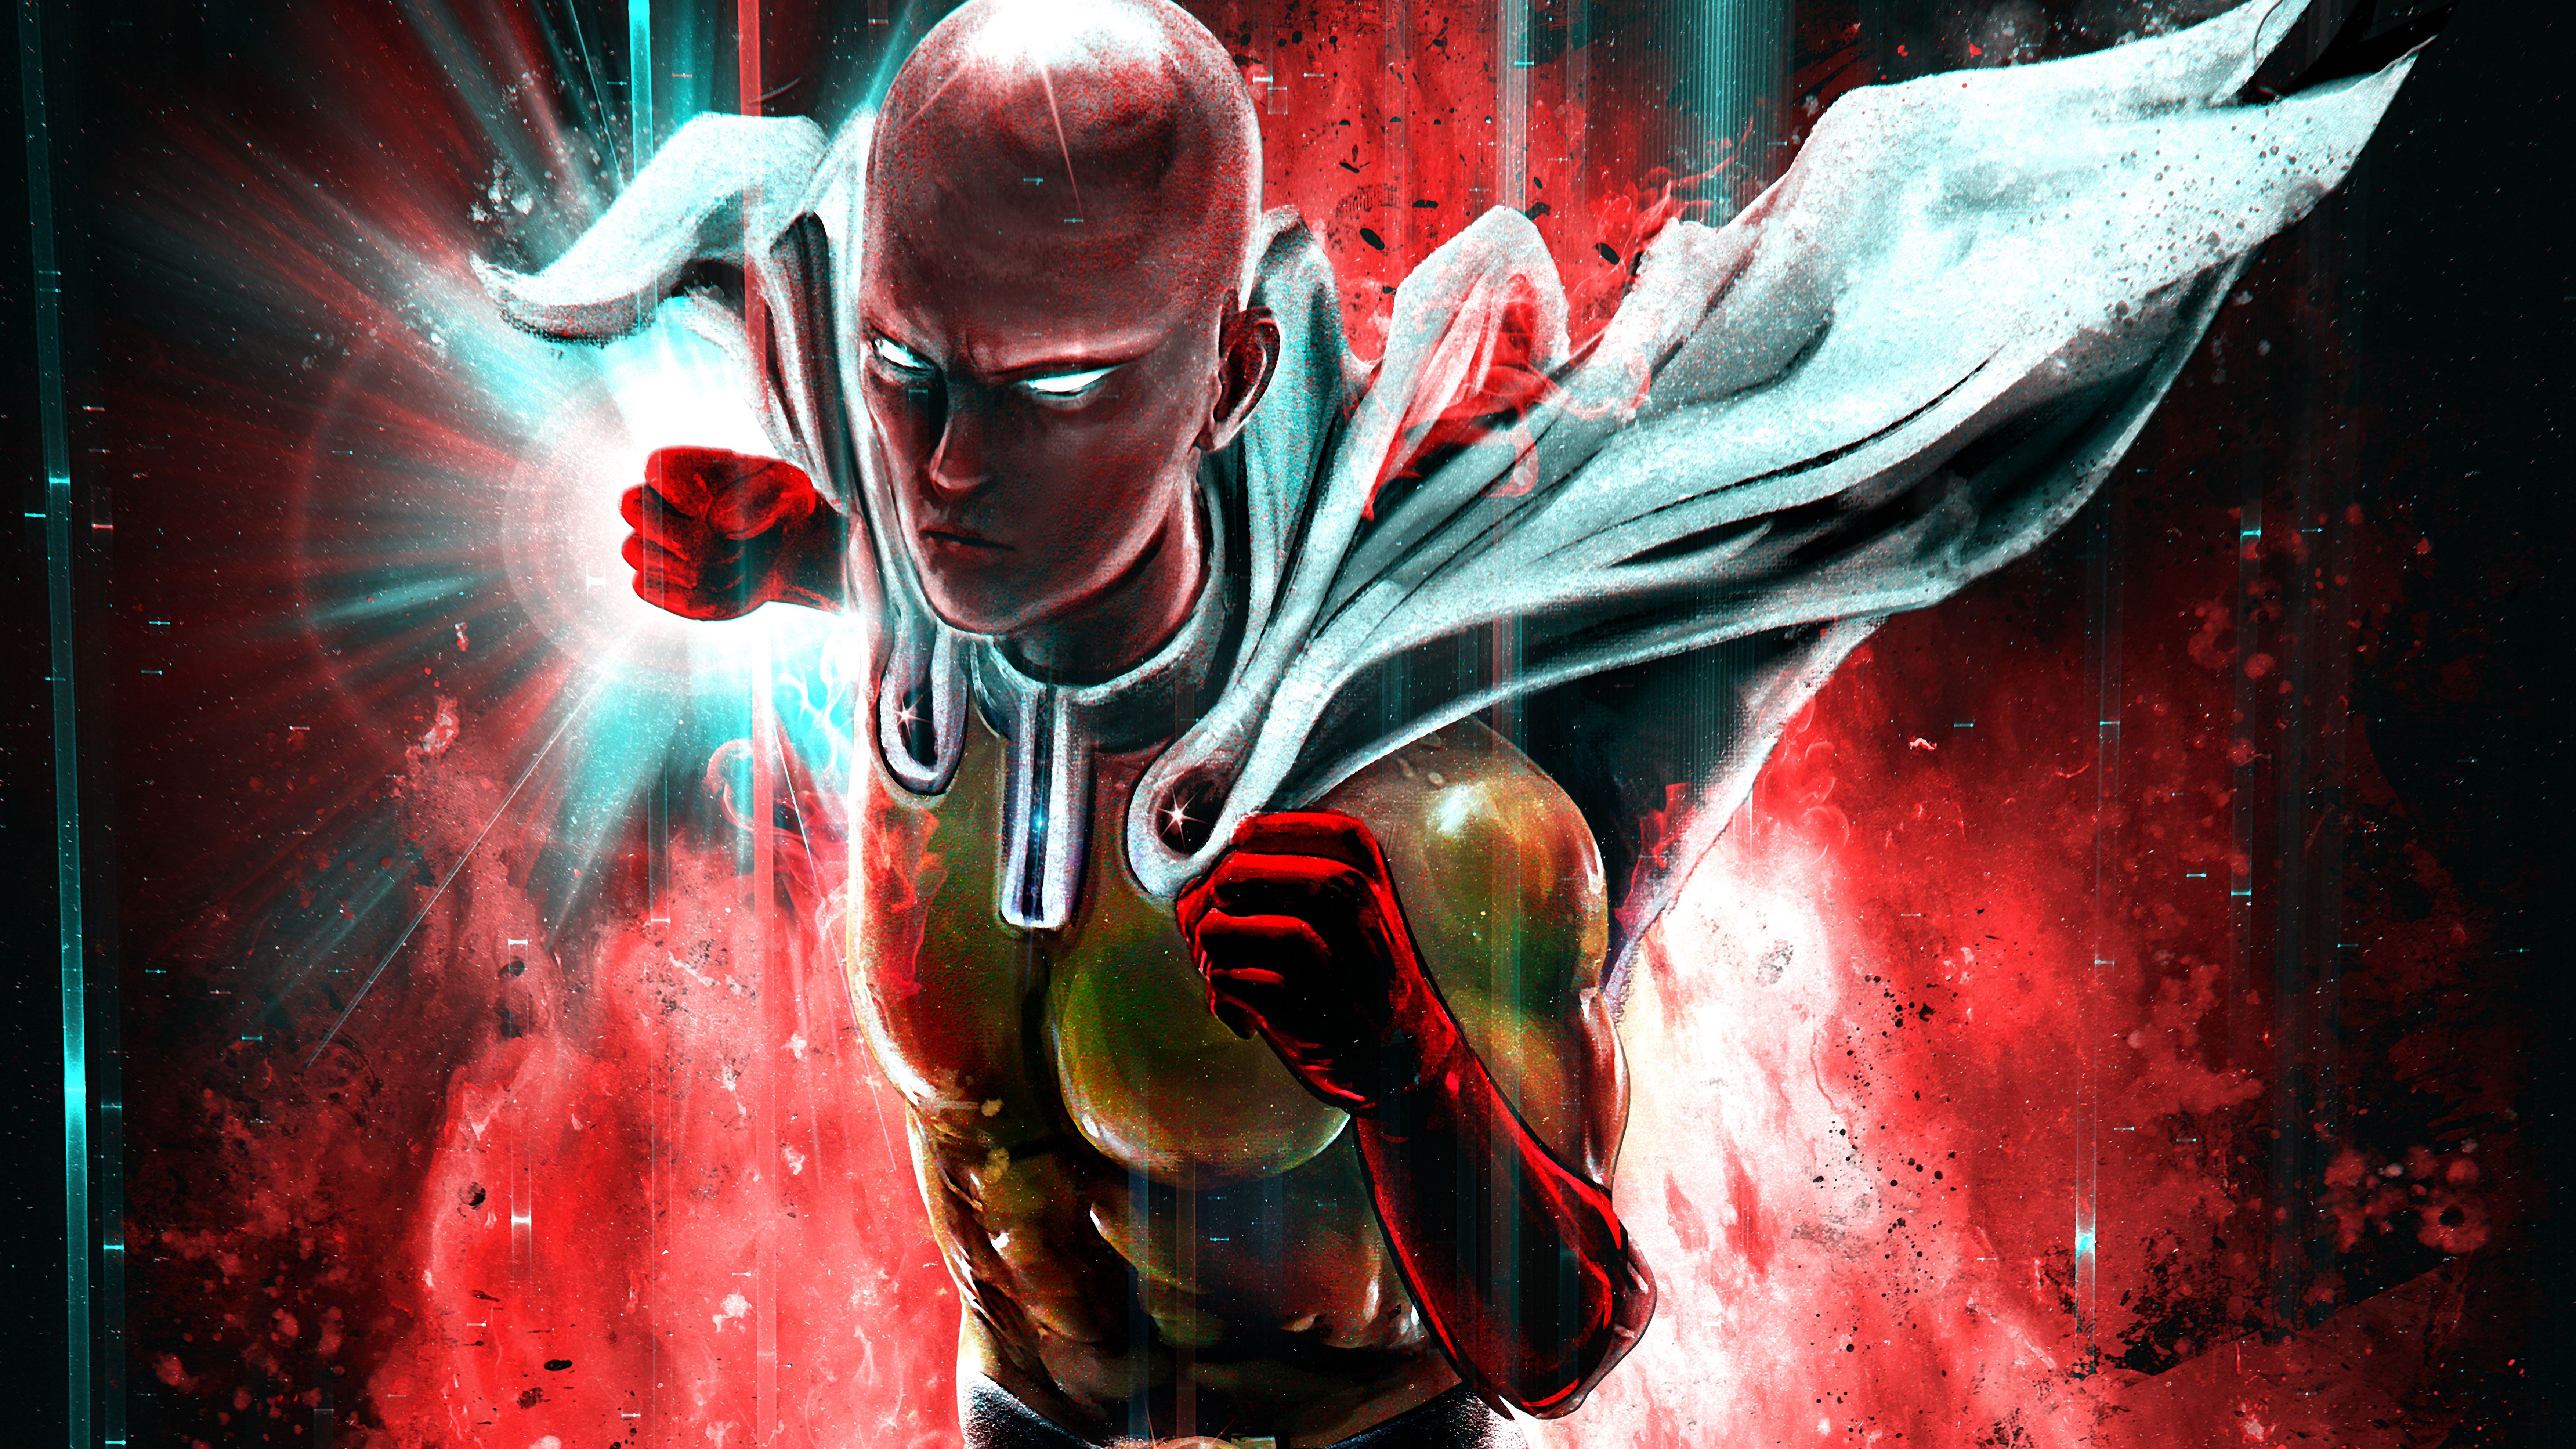 Anime One-Punch Man HD Wallpaper by SekaiNEET